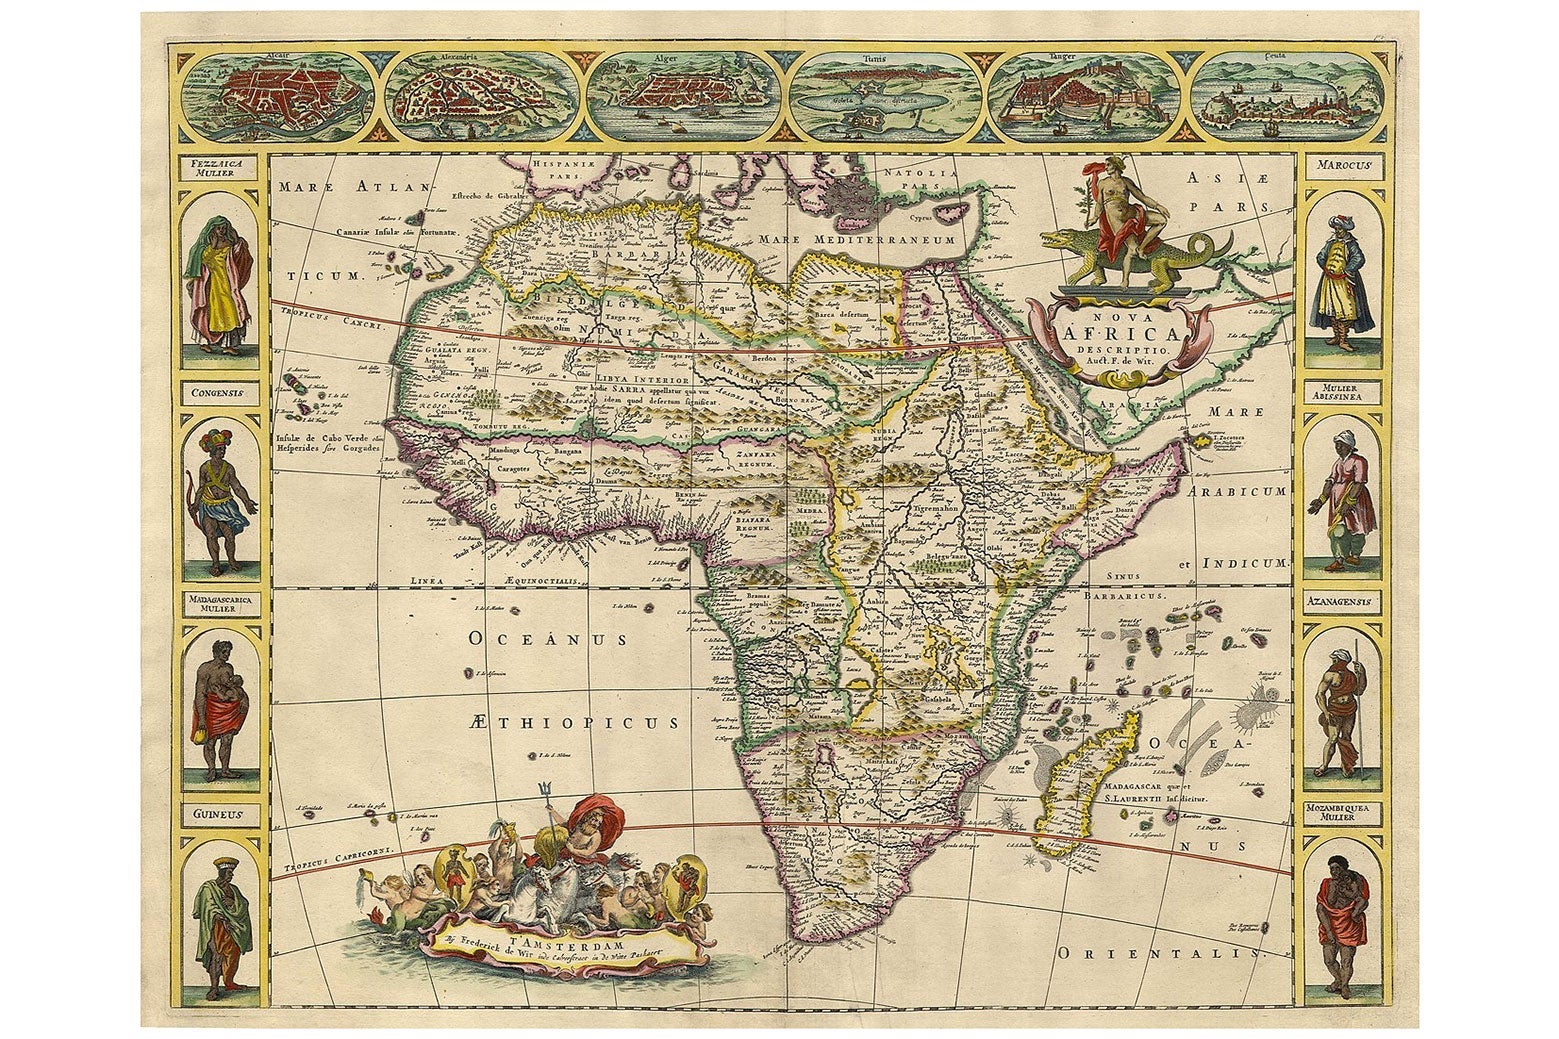 British map of Africa from 1660